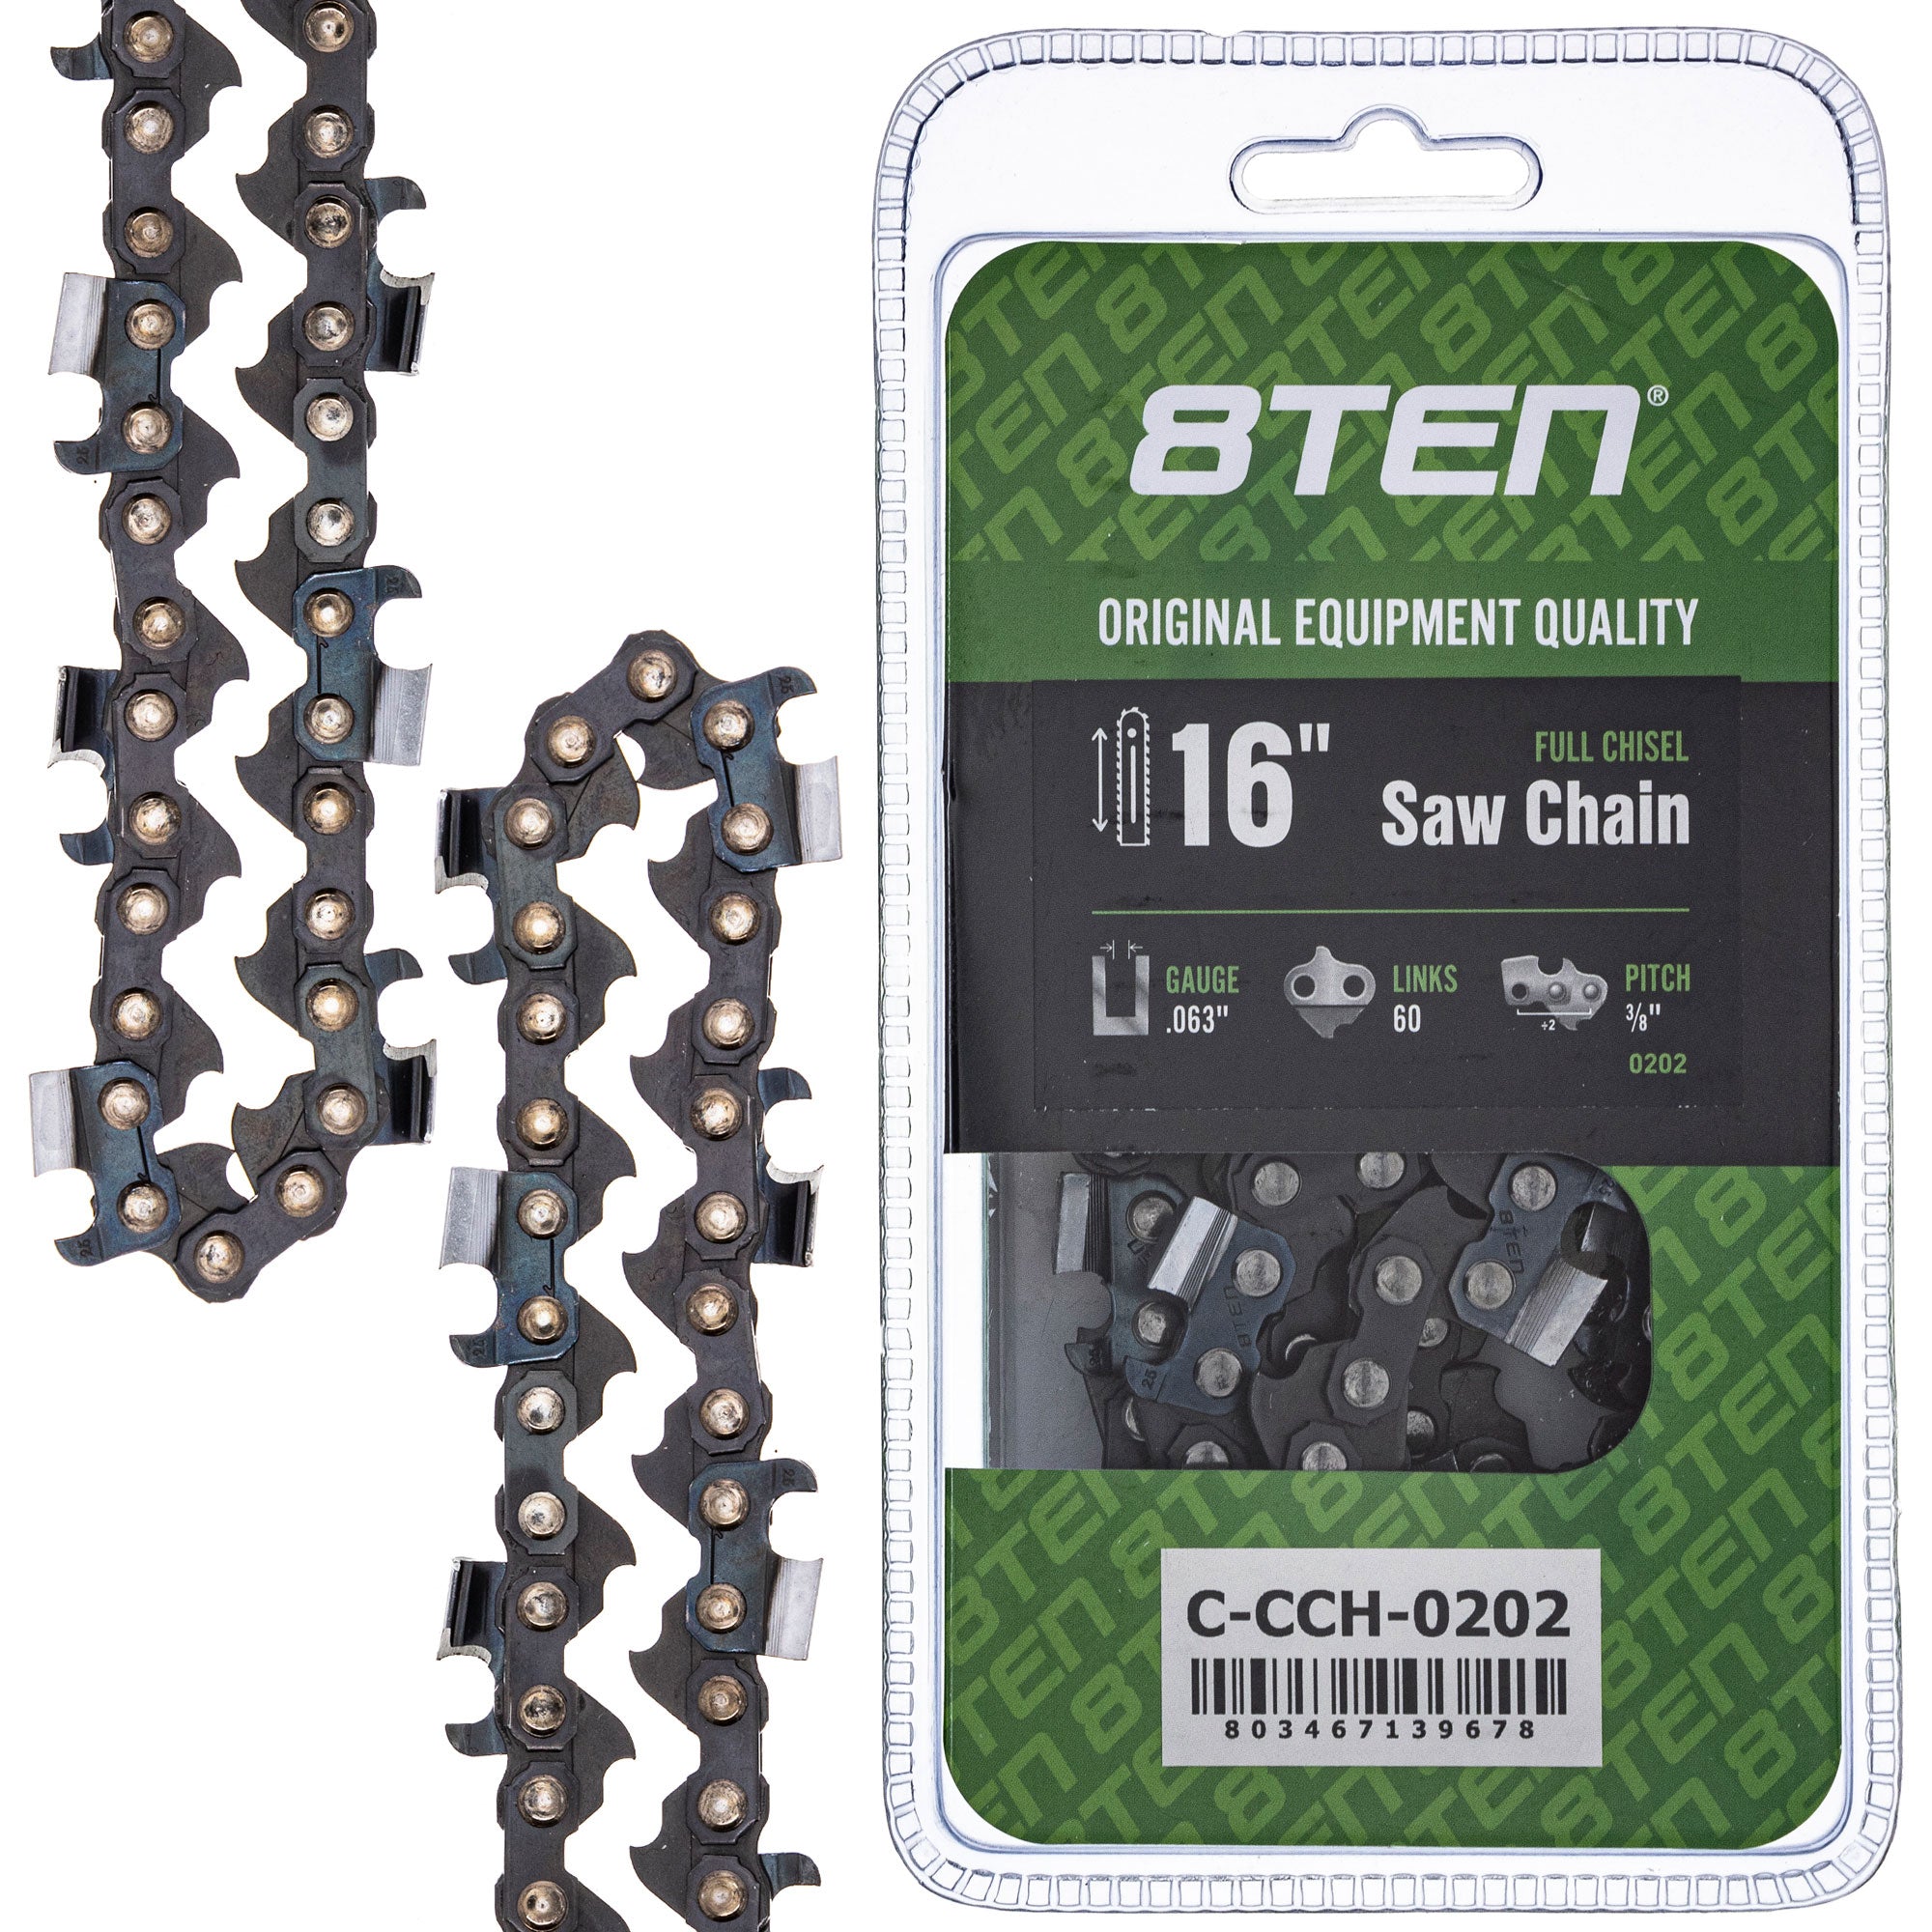 8TEN MK1010344 Guide Bar & Chain for MSE MS E 066